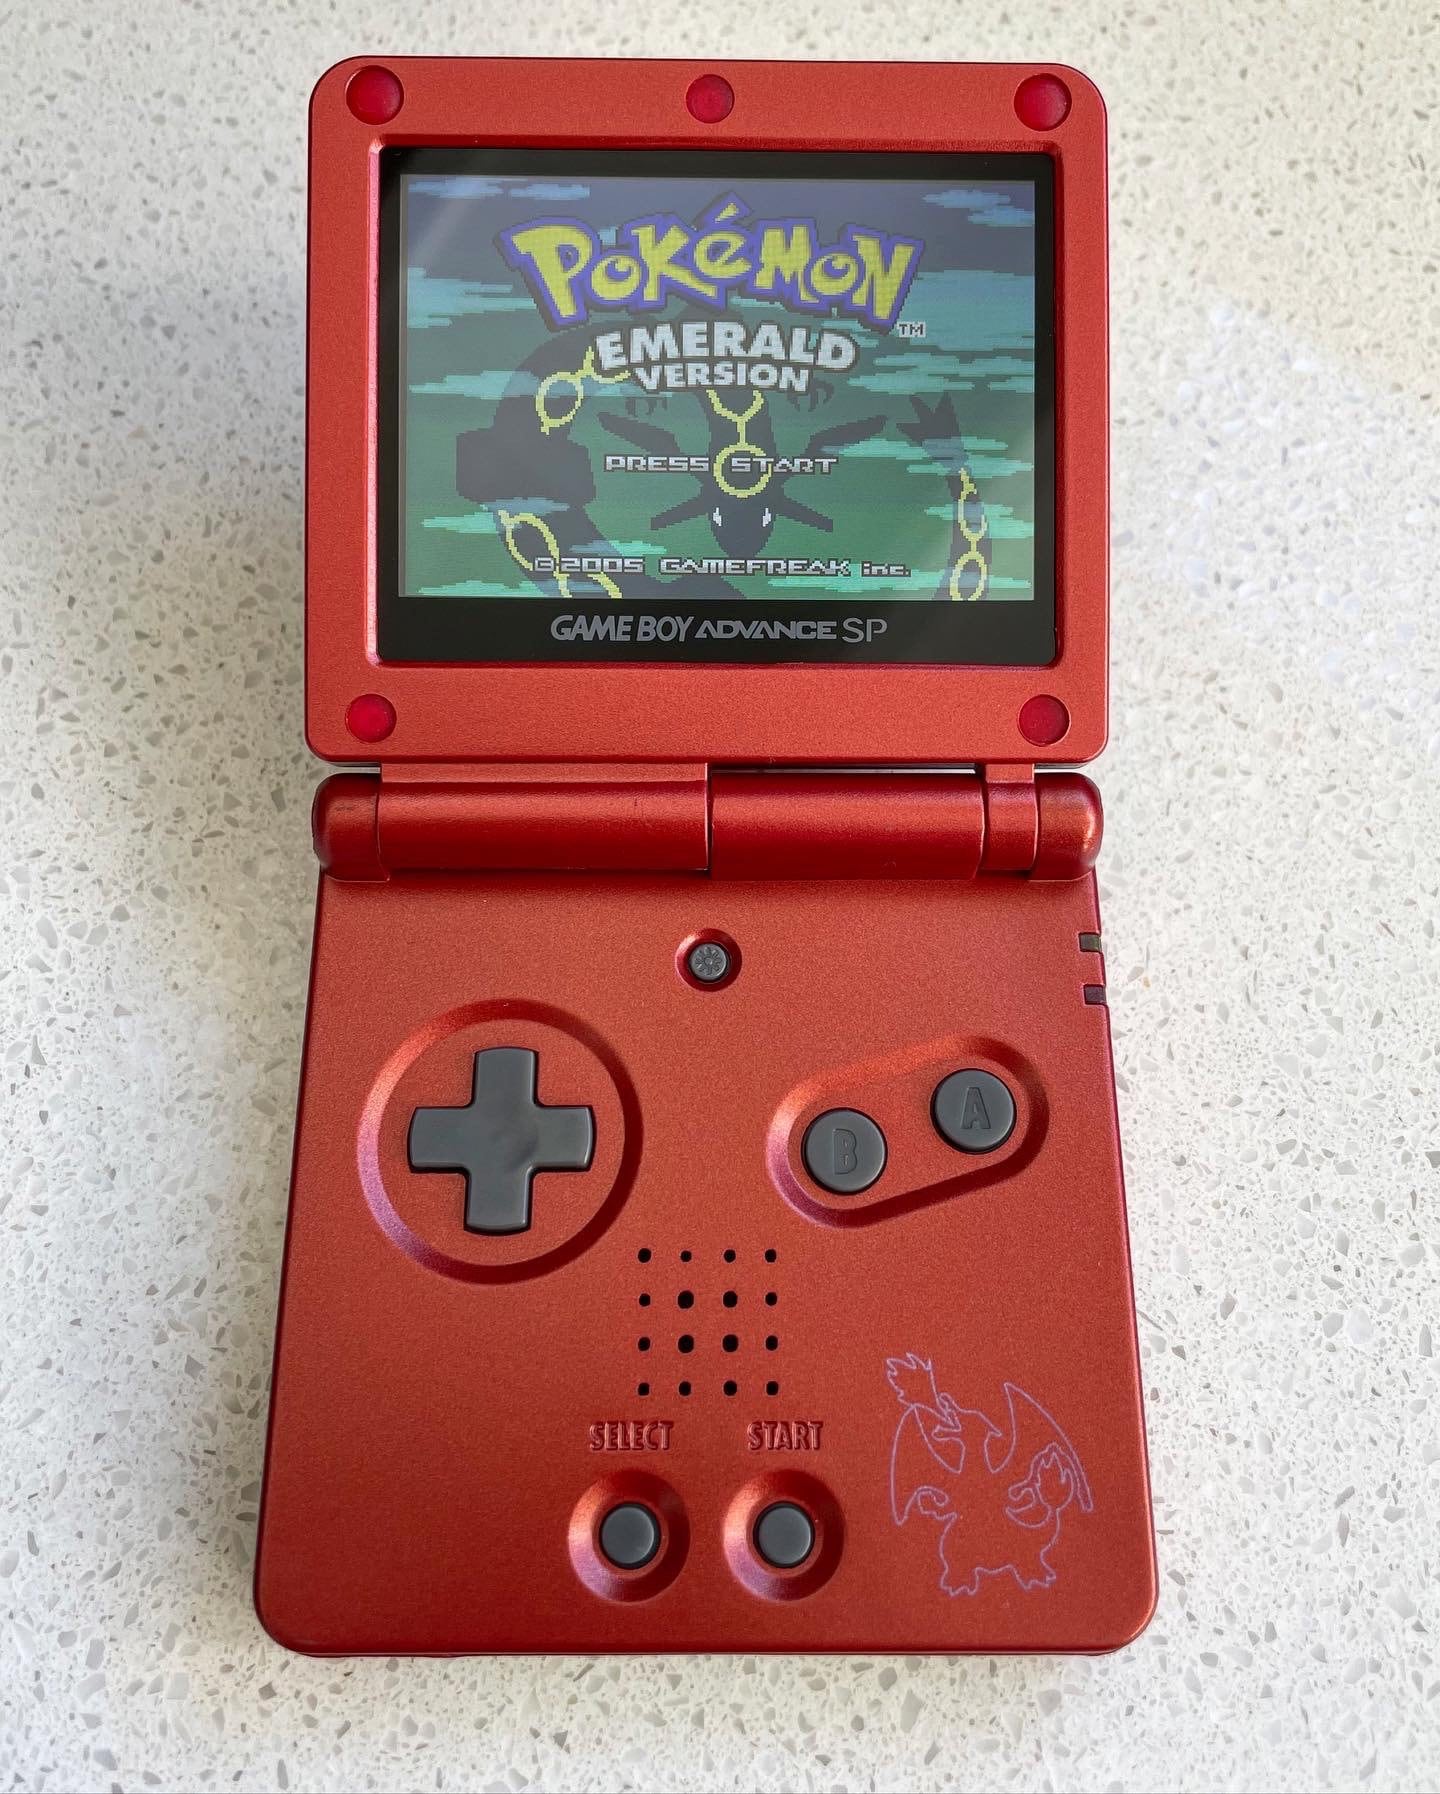 gameboy advance sp - Video games & consoles